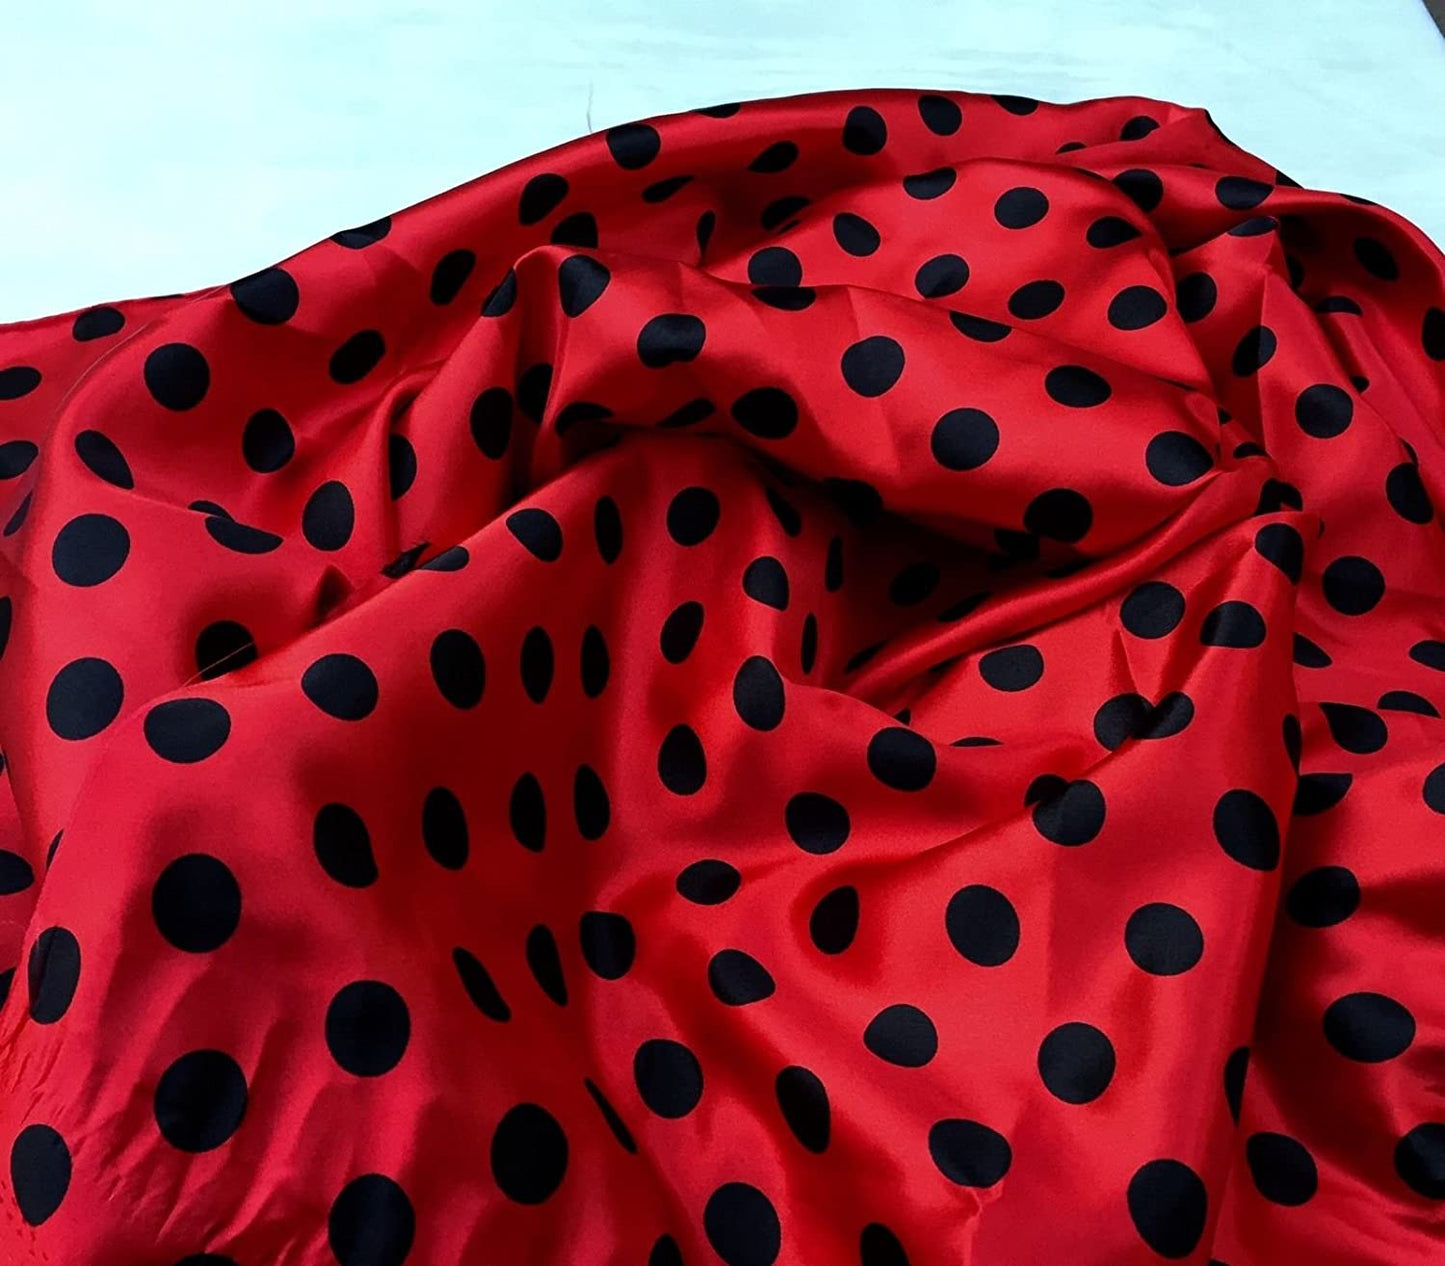 Red/black 1/2inch Polka Dot Silky/soft Charmeuse Satin Fabric. By The Yard